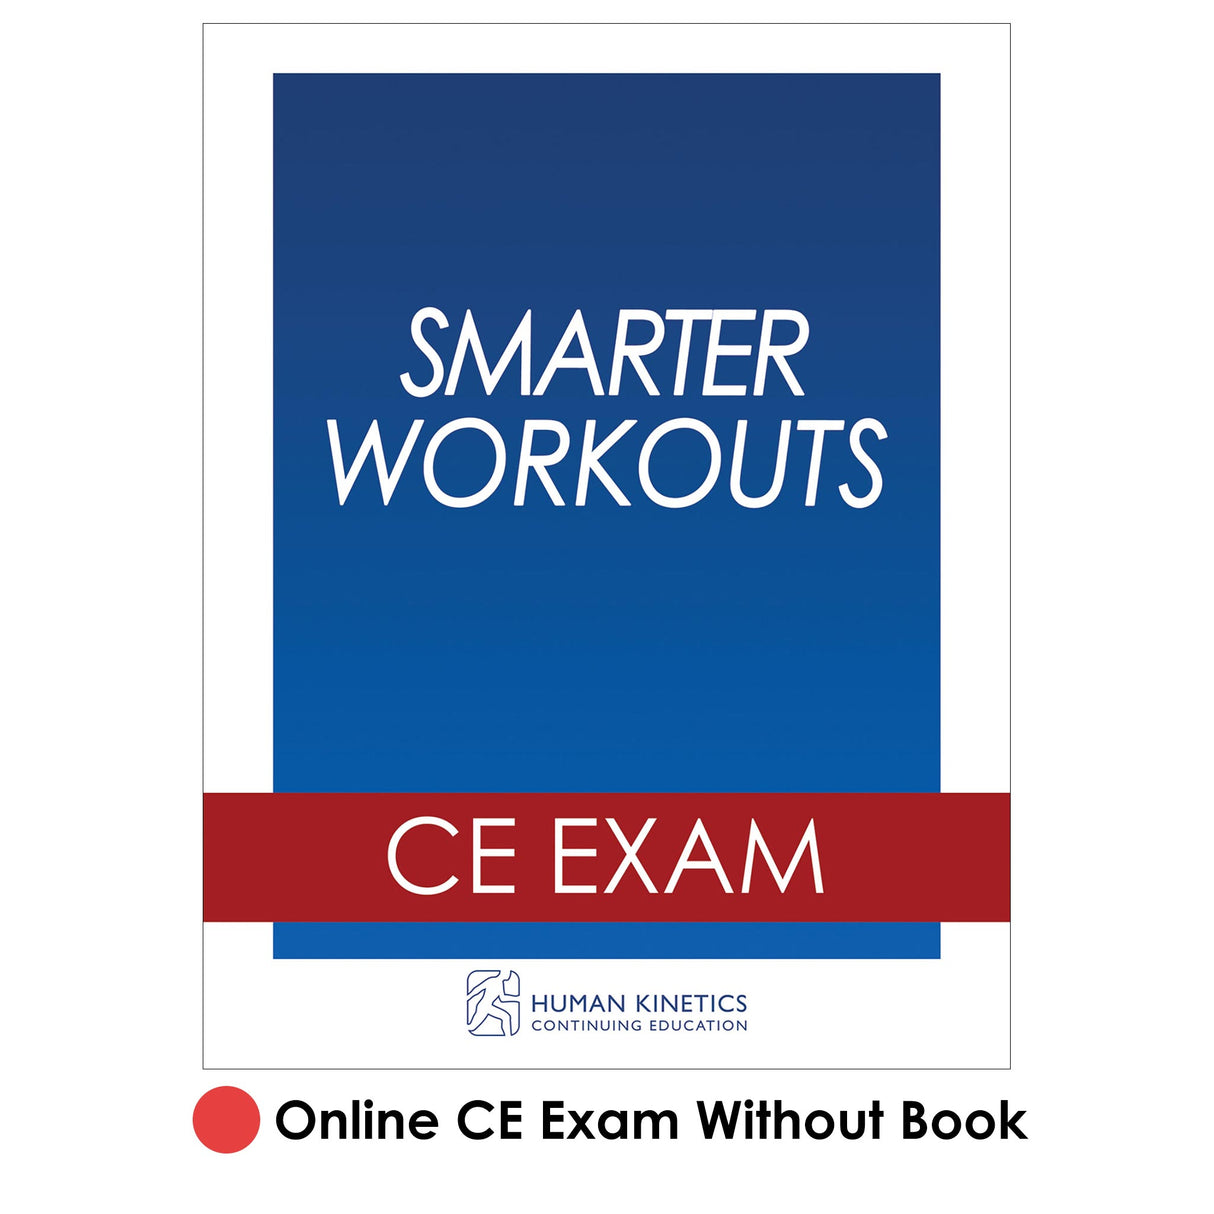 Smarter Workouts Online CE Exam Without Book